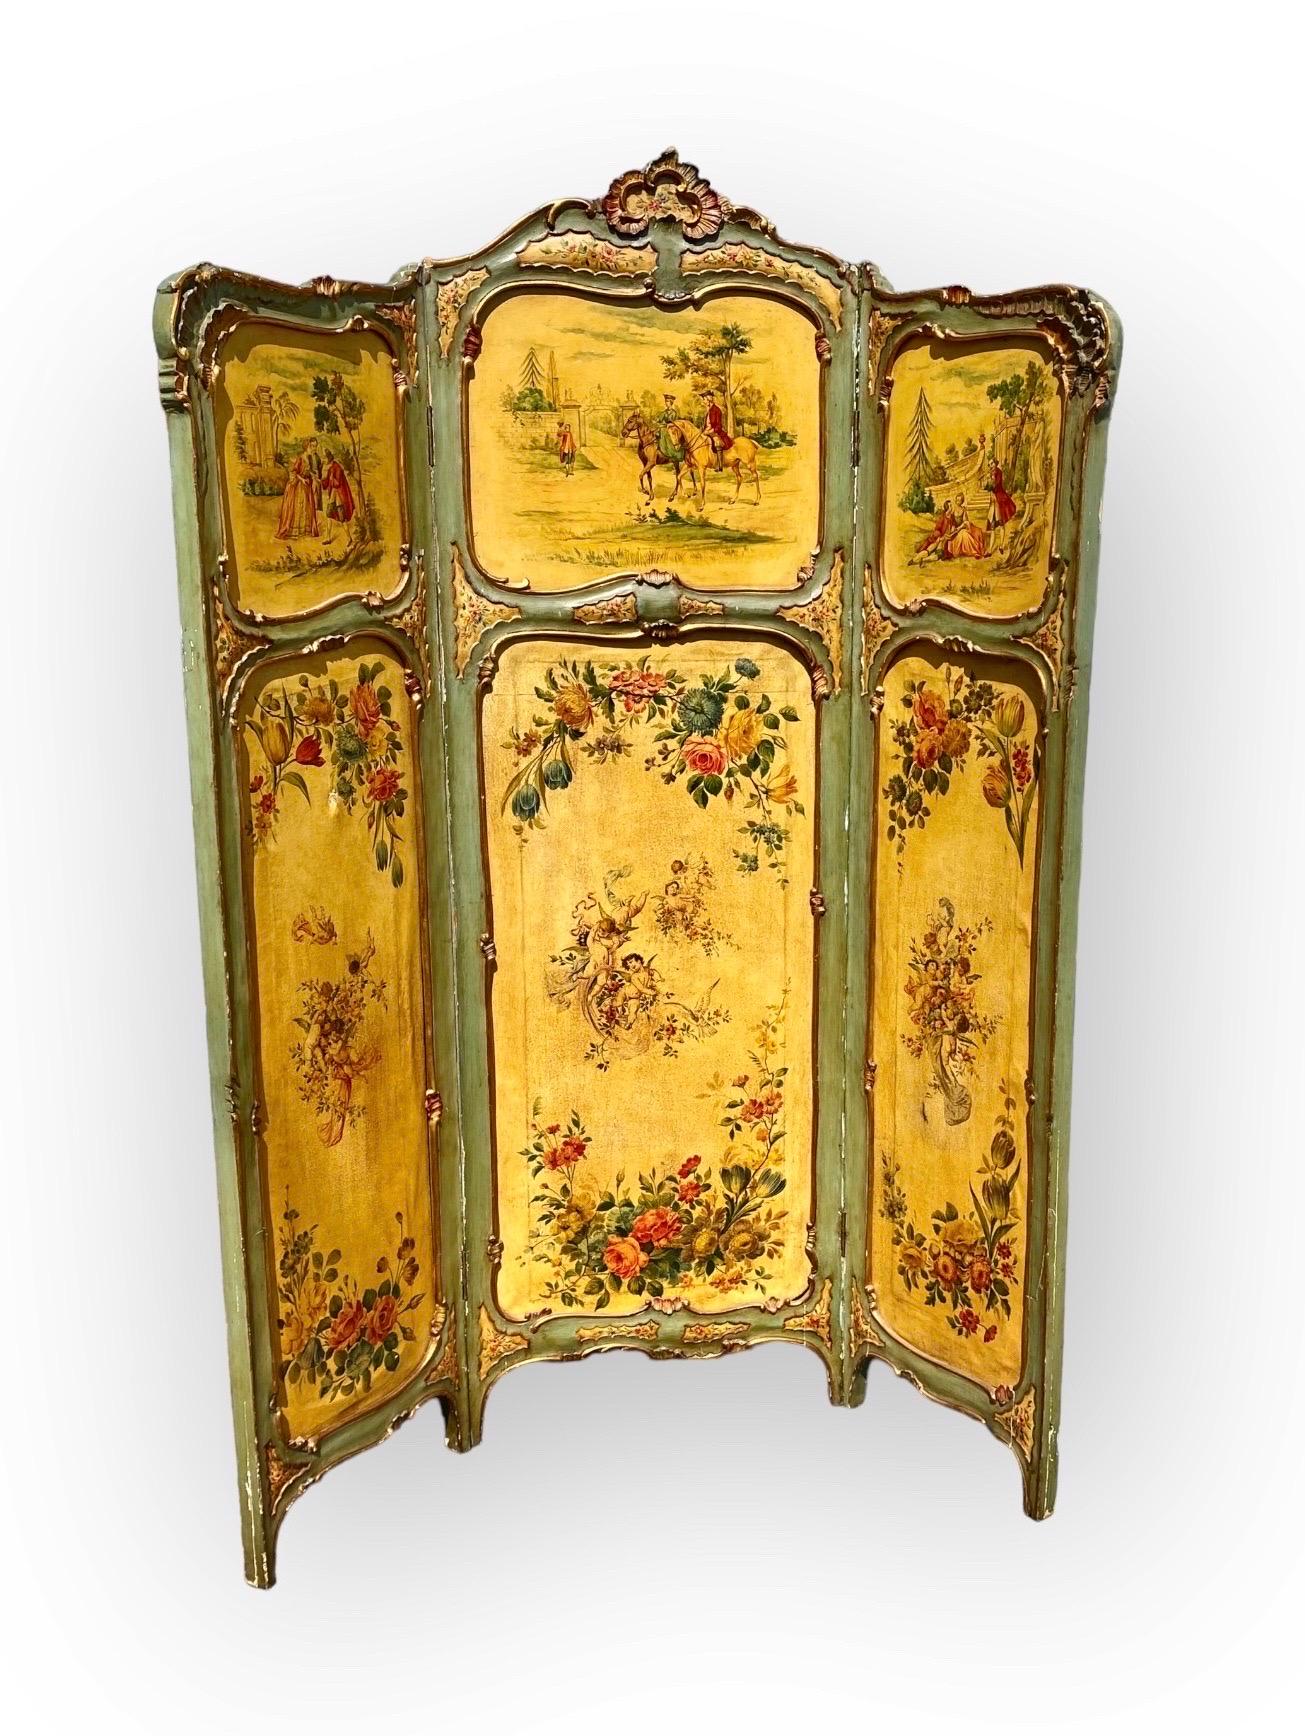 Antique French Louie XV style three panel folding dressing screen having decorative painted canvas panels depicting winged cherubs playing in green, red and ochre floral landscape scenes and 19th c. Figures in pastoral scenes, on grounds of lovely